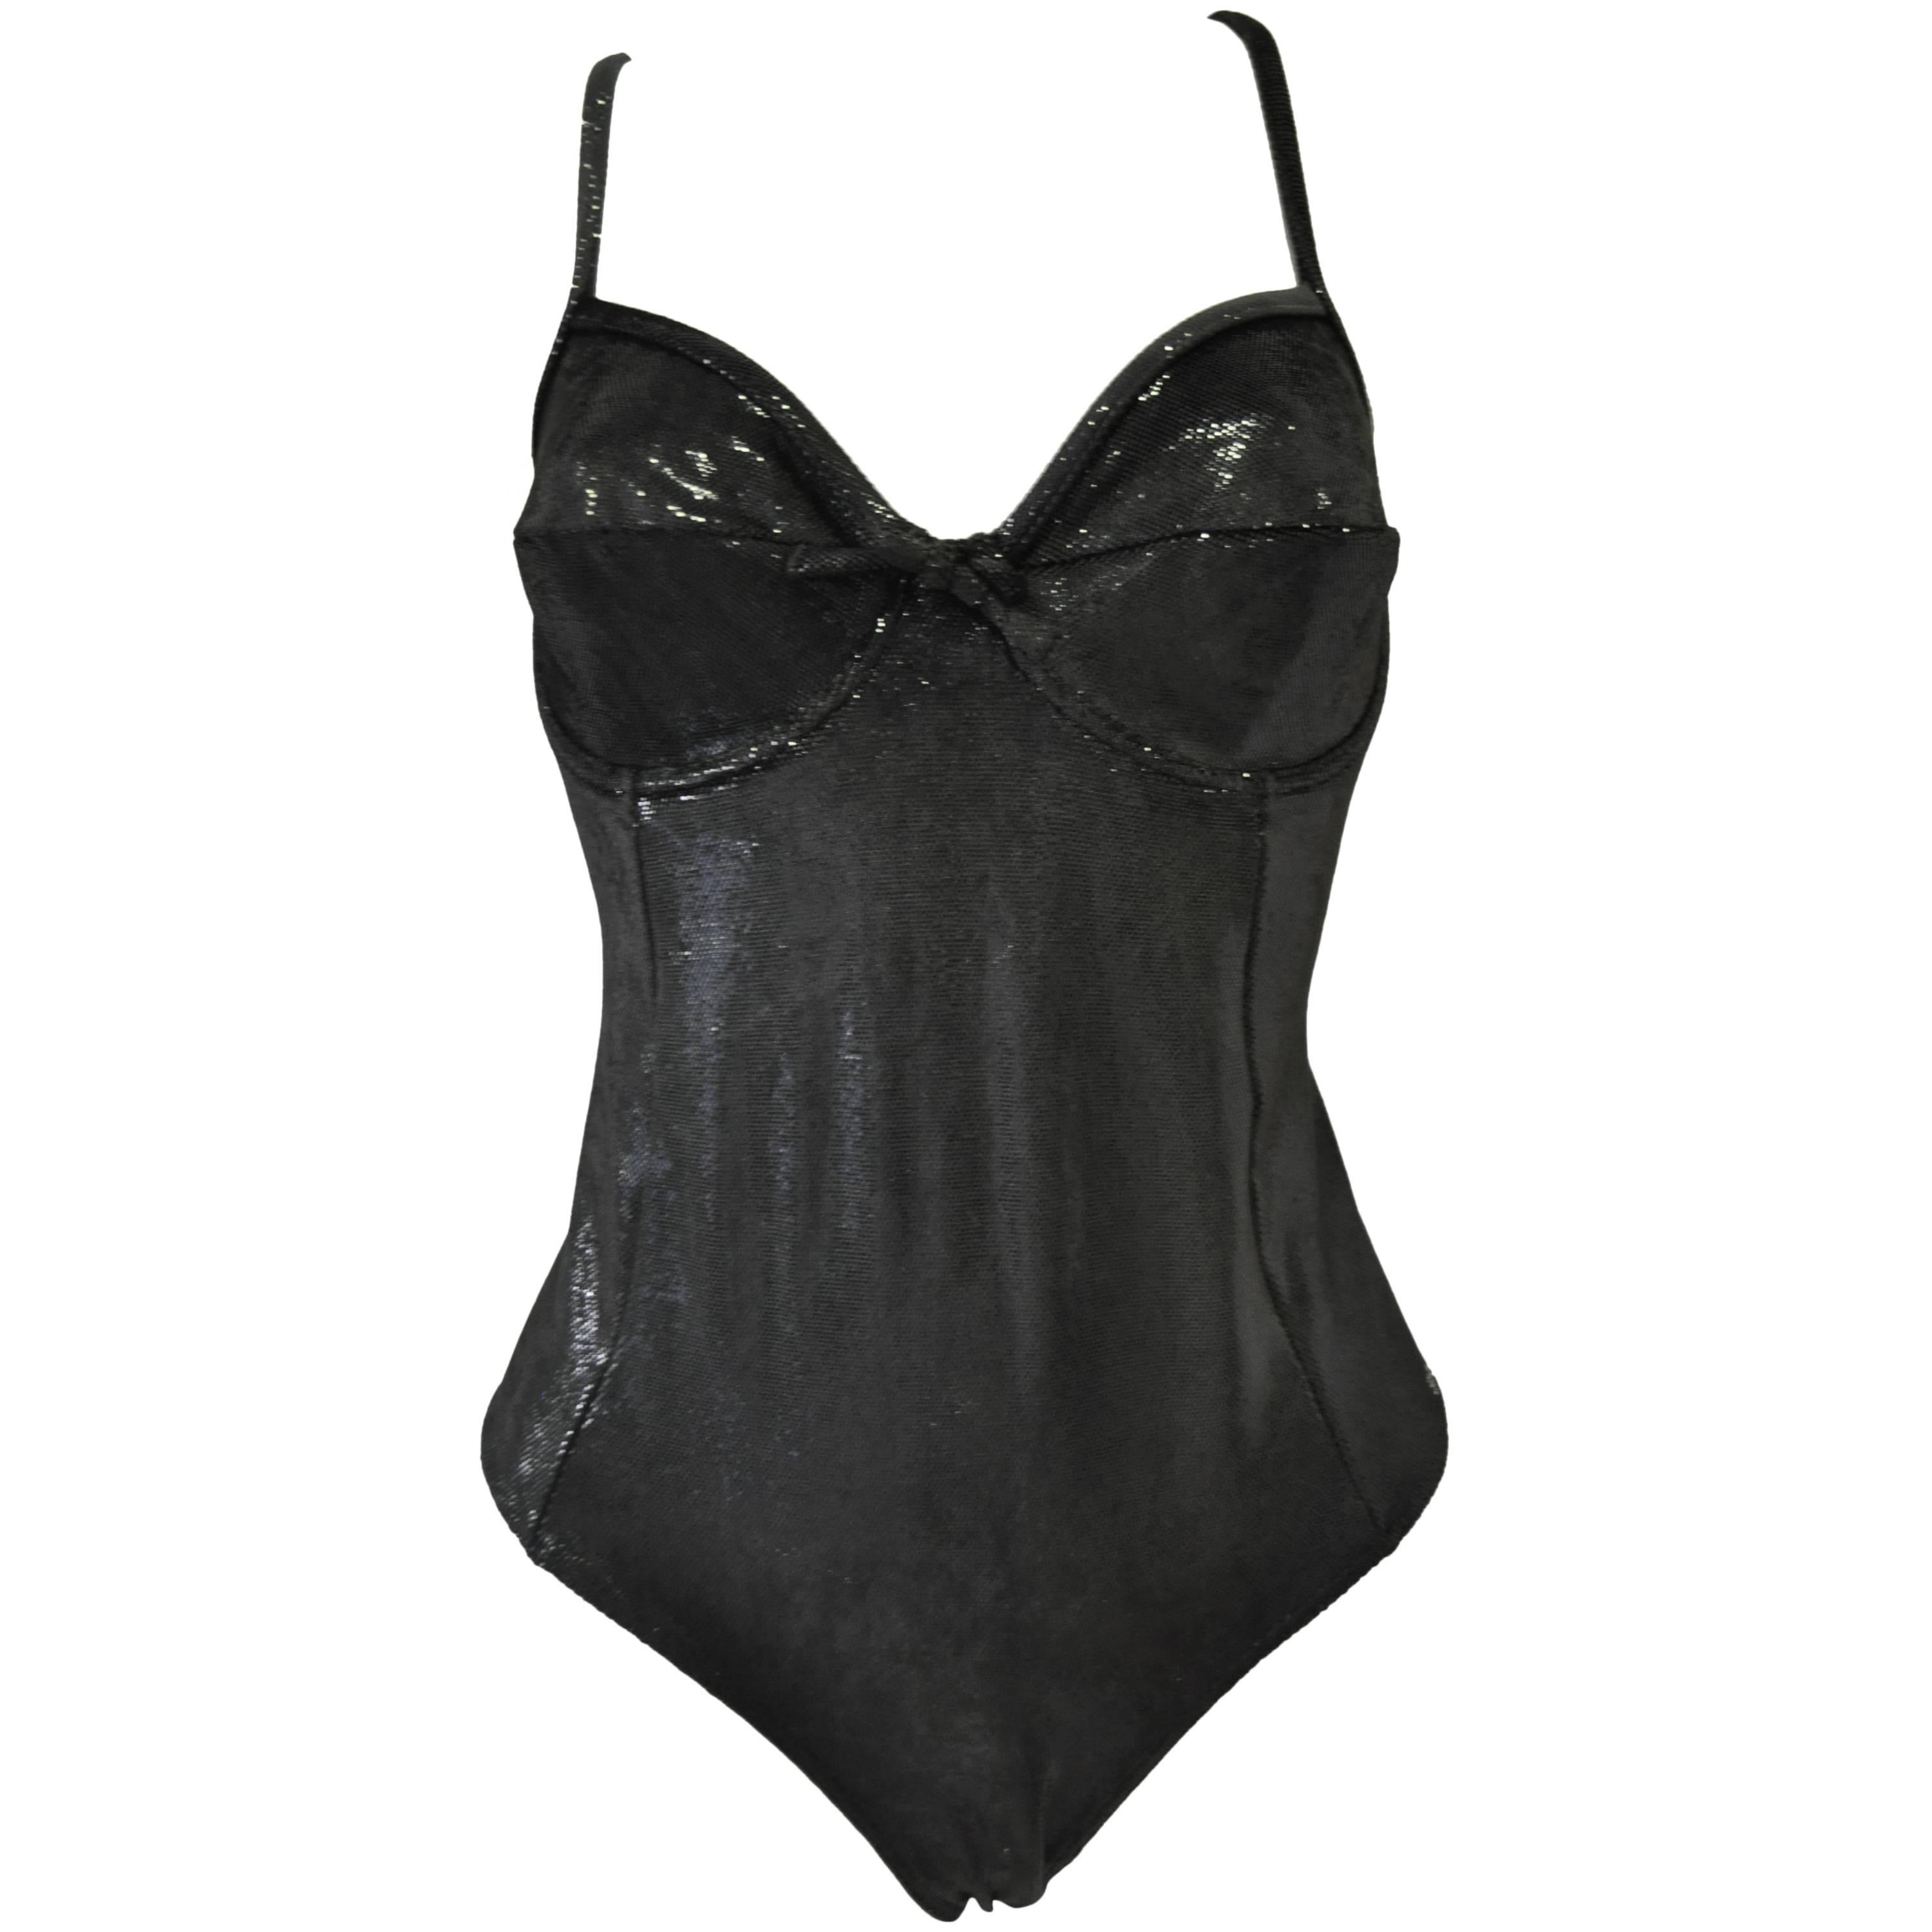 Sultry Sonia Rykiel Shimmery Black Python Print Bustier Swimsuit For Sale